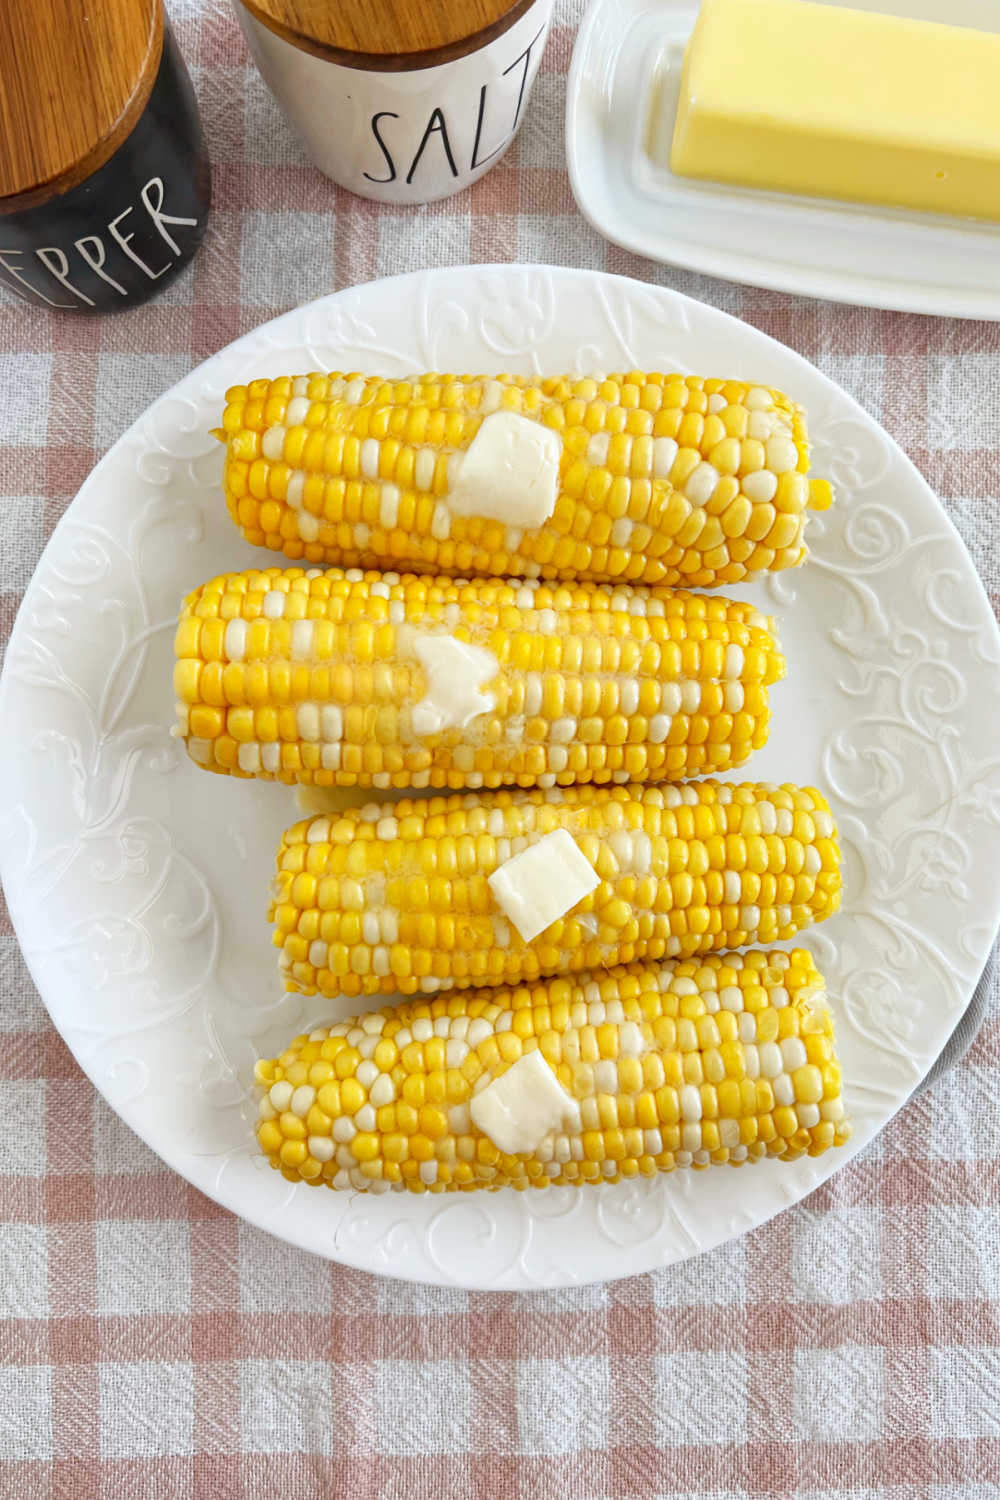 plate of corn on the cob with butter on the table.